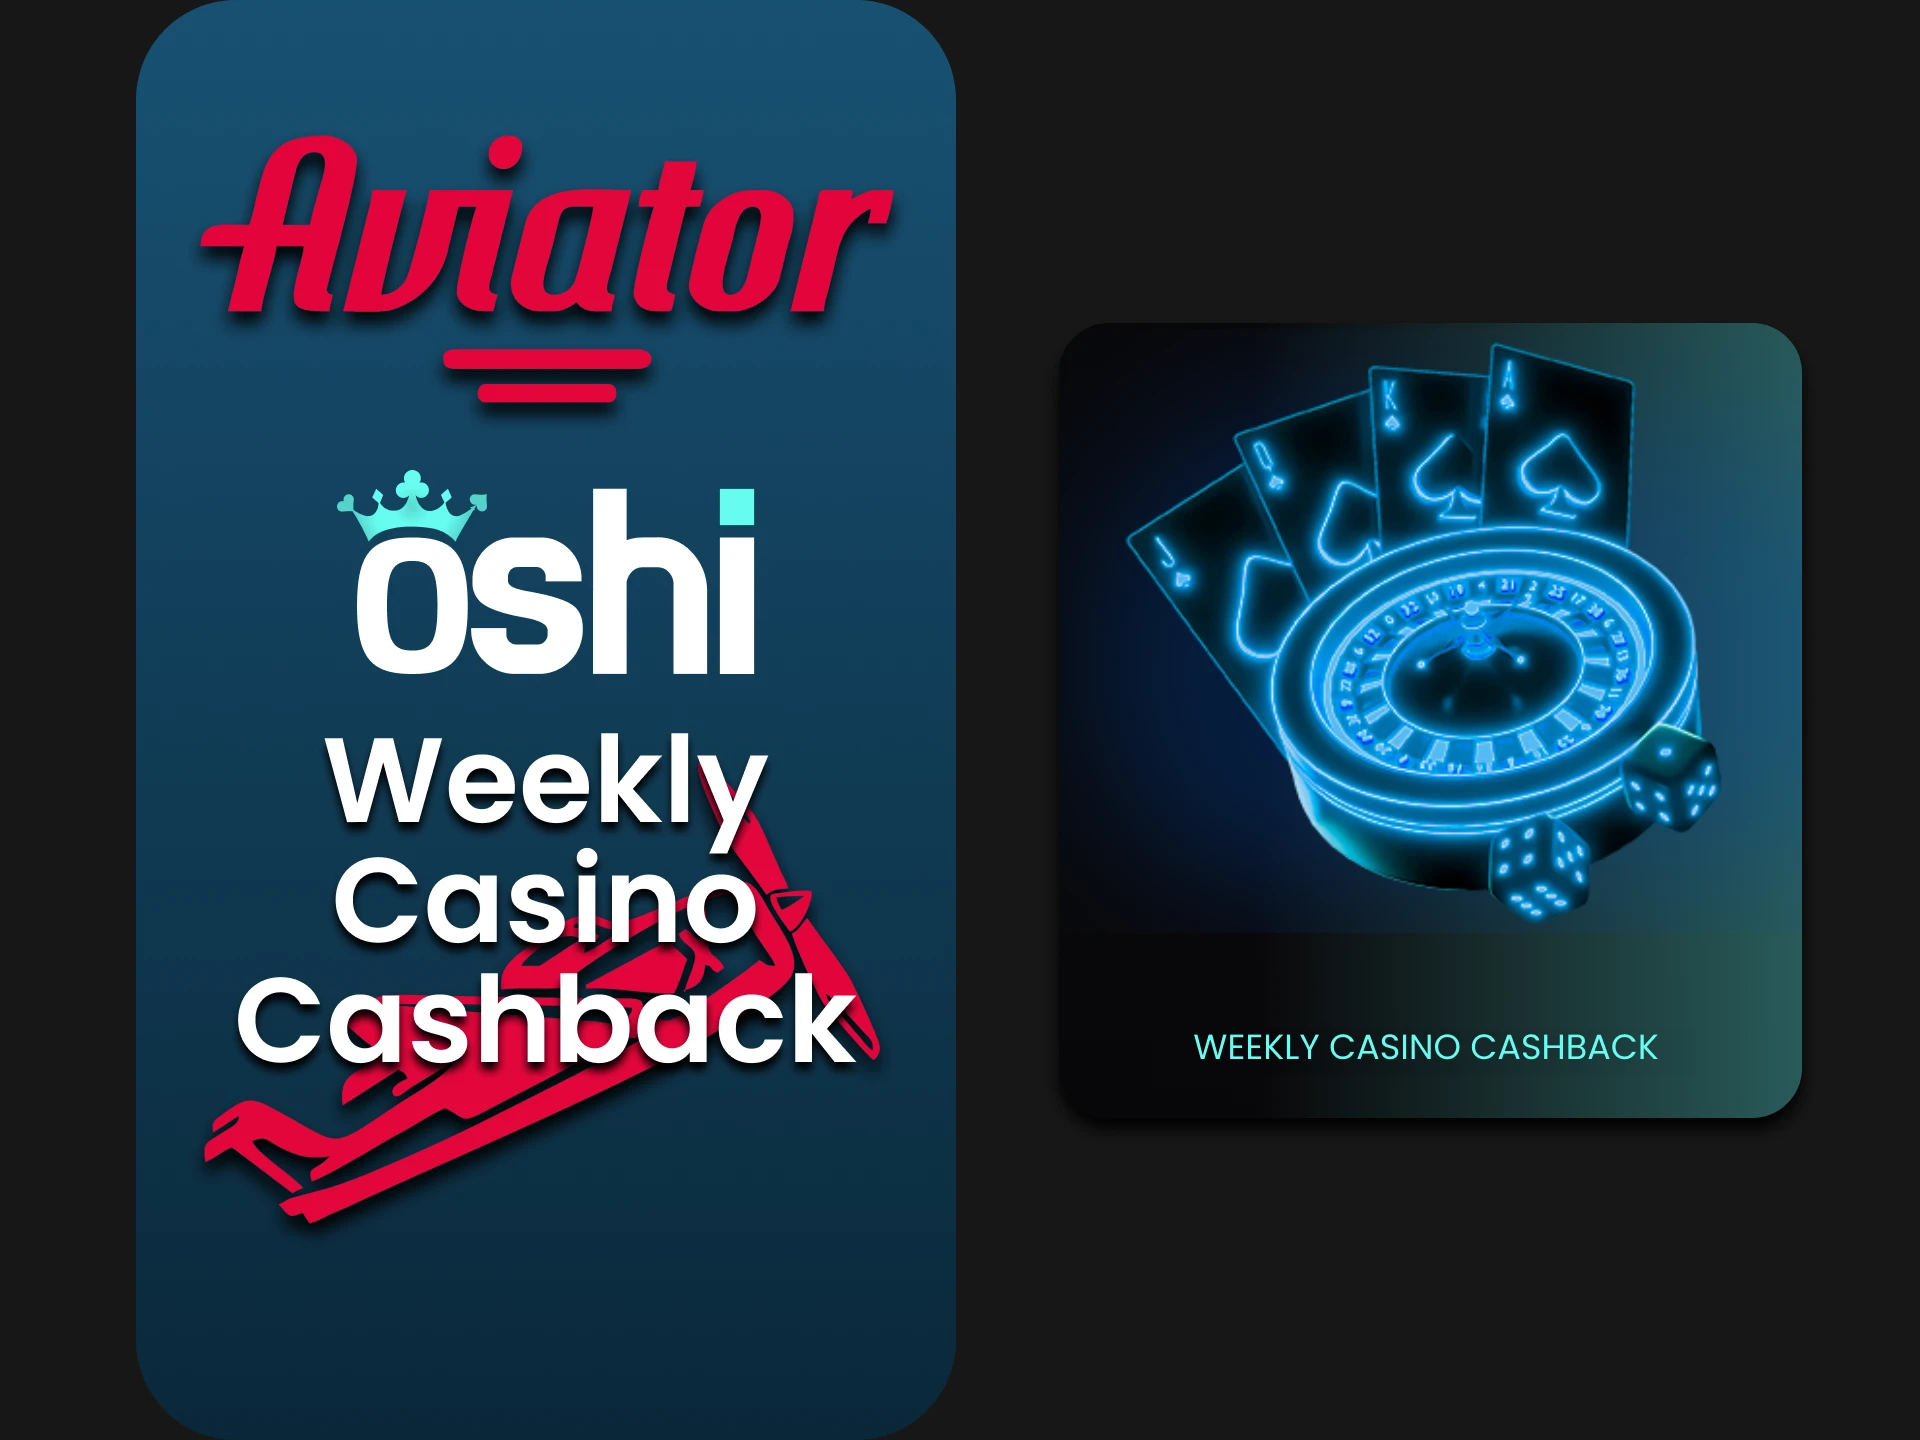 Oshi Casino gives cashback in the form of a casino bonus.